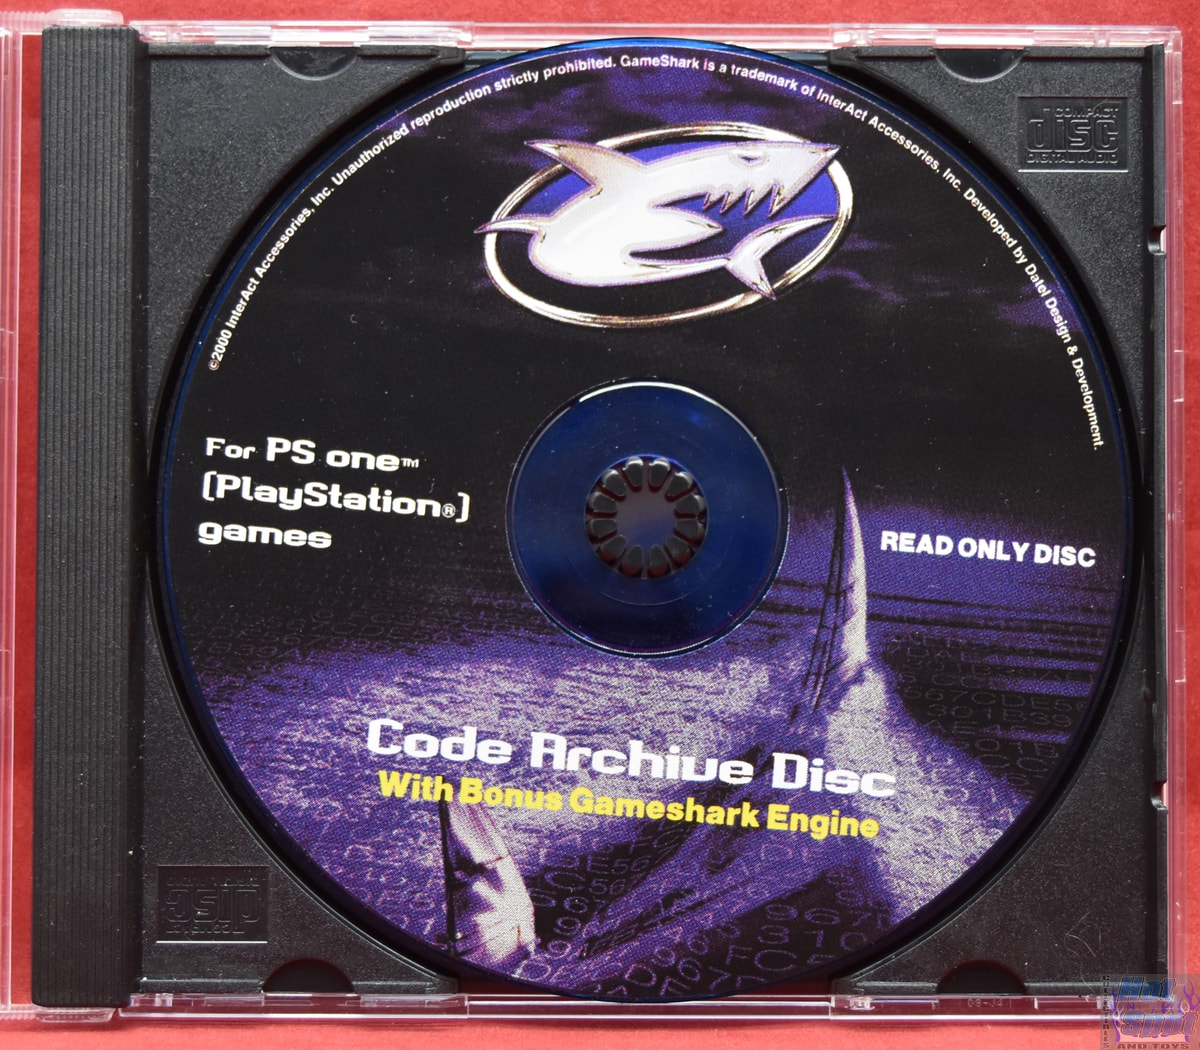 GameShark 2 Version 4 Playstation 2 PS2 Disc Only